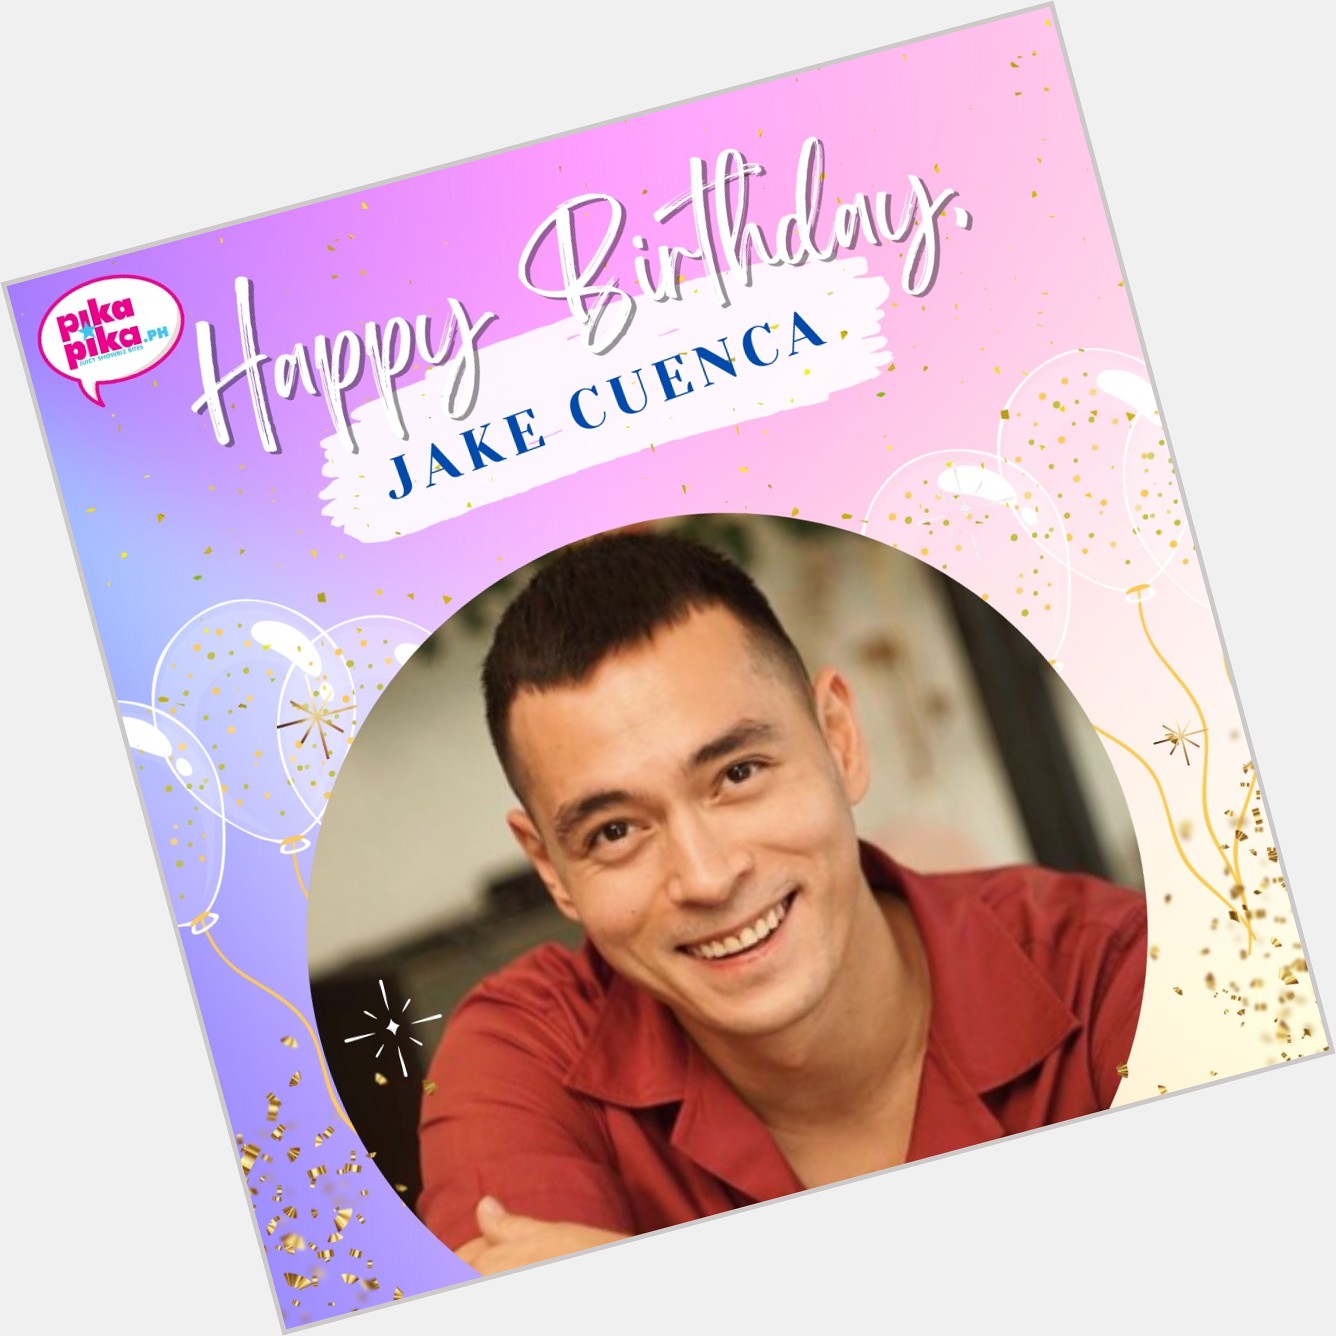 Happy birthday, Jake Cuenca! May your special day be filled with love and cheers.    